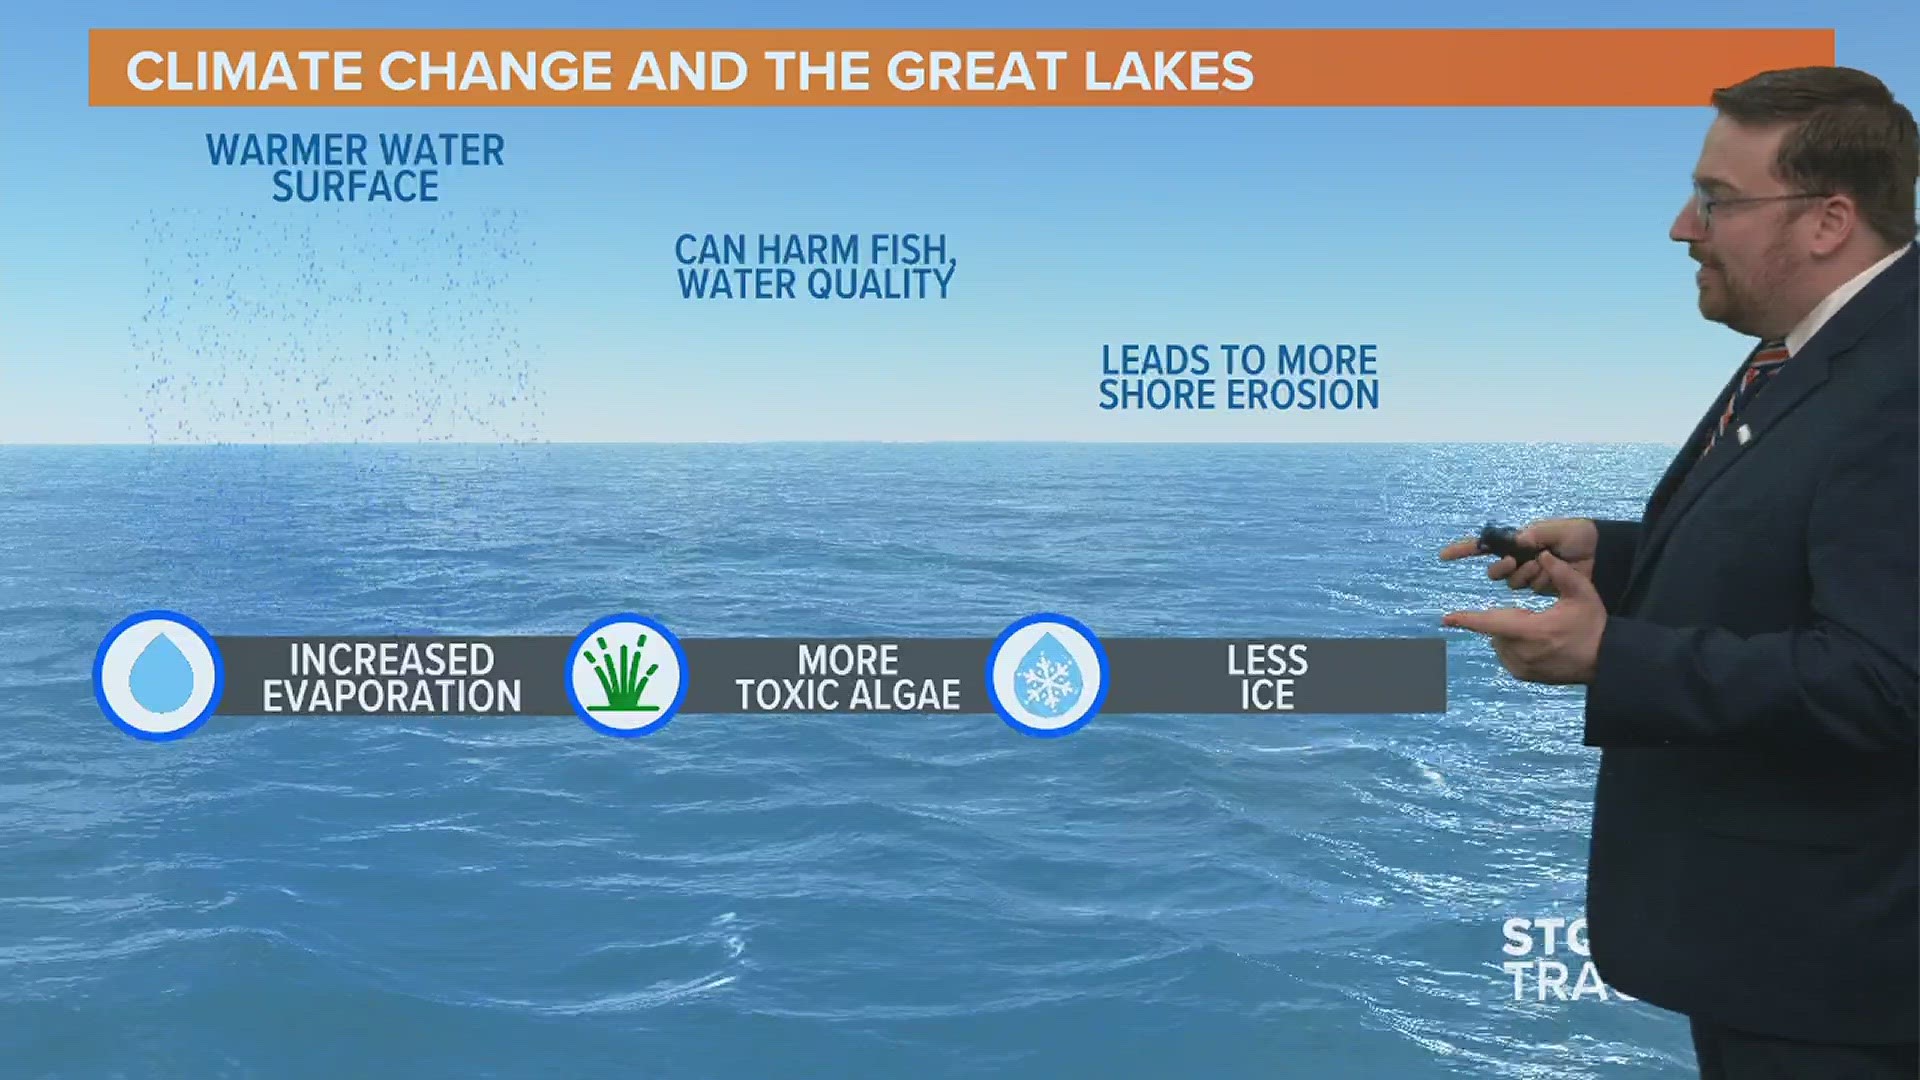 Algae blooms, warmer water temperatures, and more beach erosion are just a few side effects that climate change will bring to the Great Lakes.